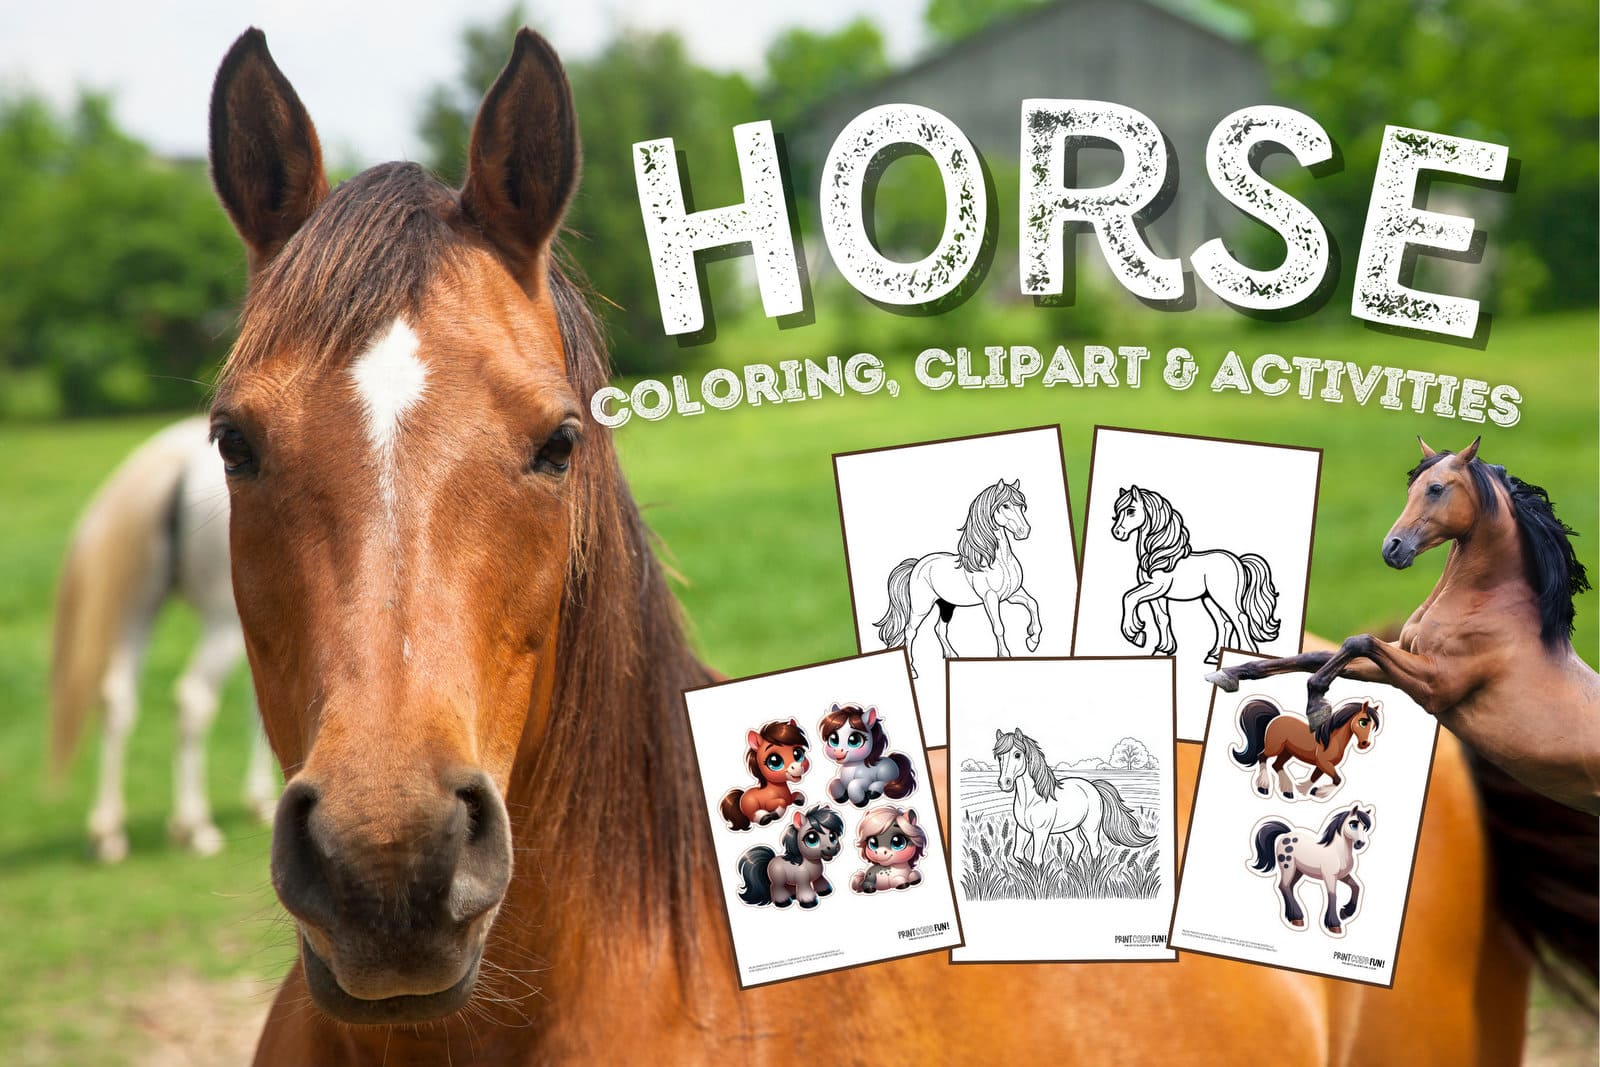 Beautiful horse coloring pages plus crafts educational games to saddle up for fun at